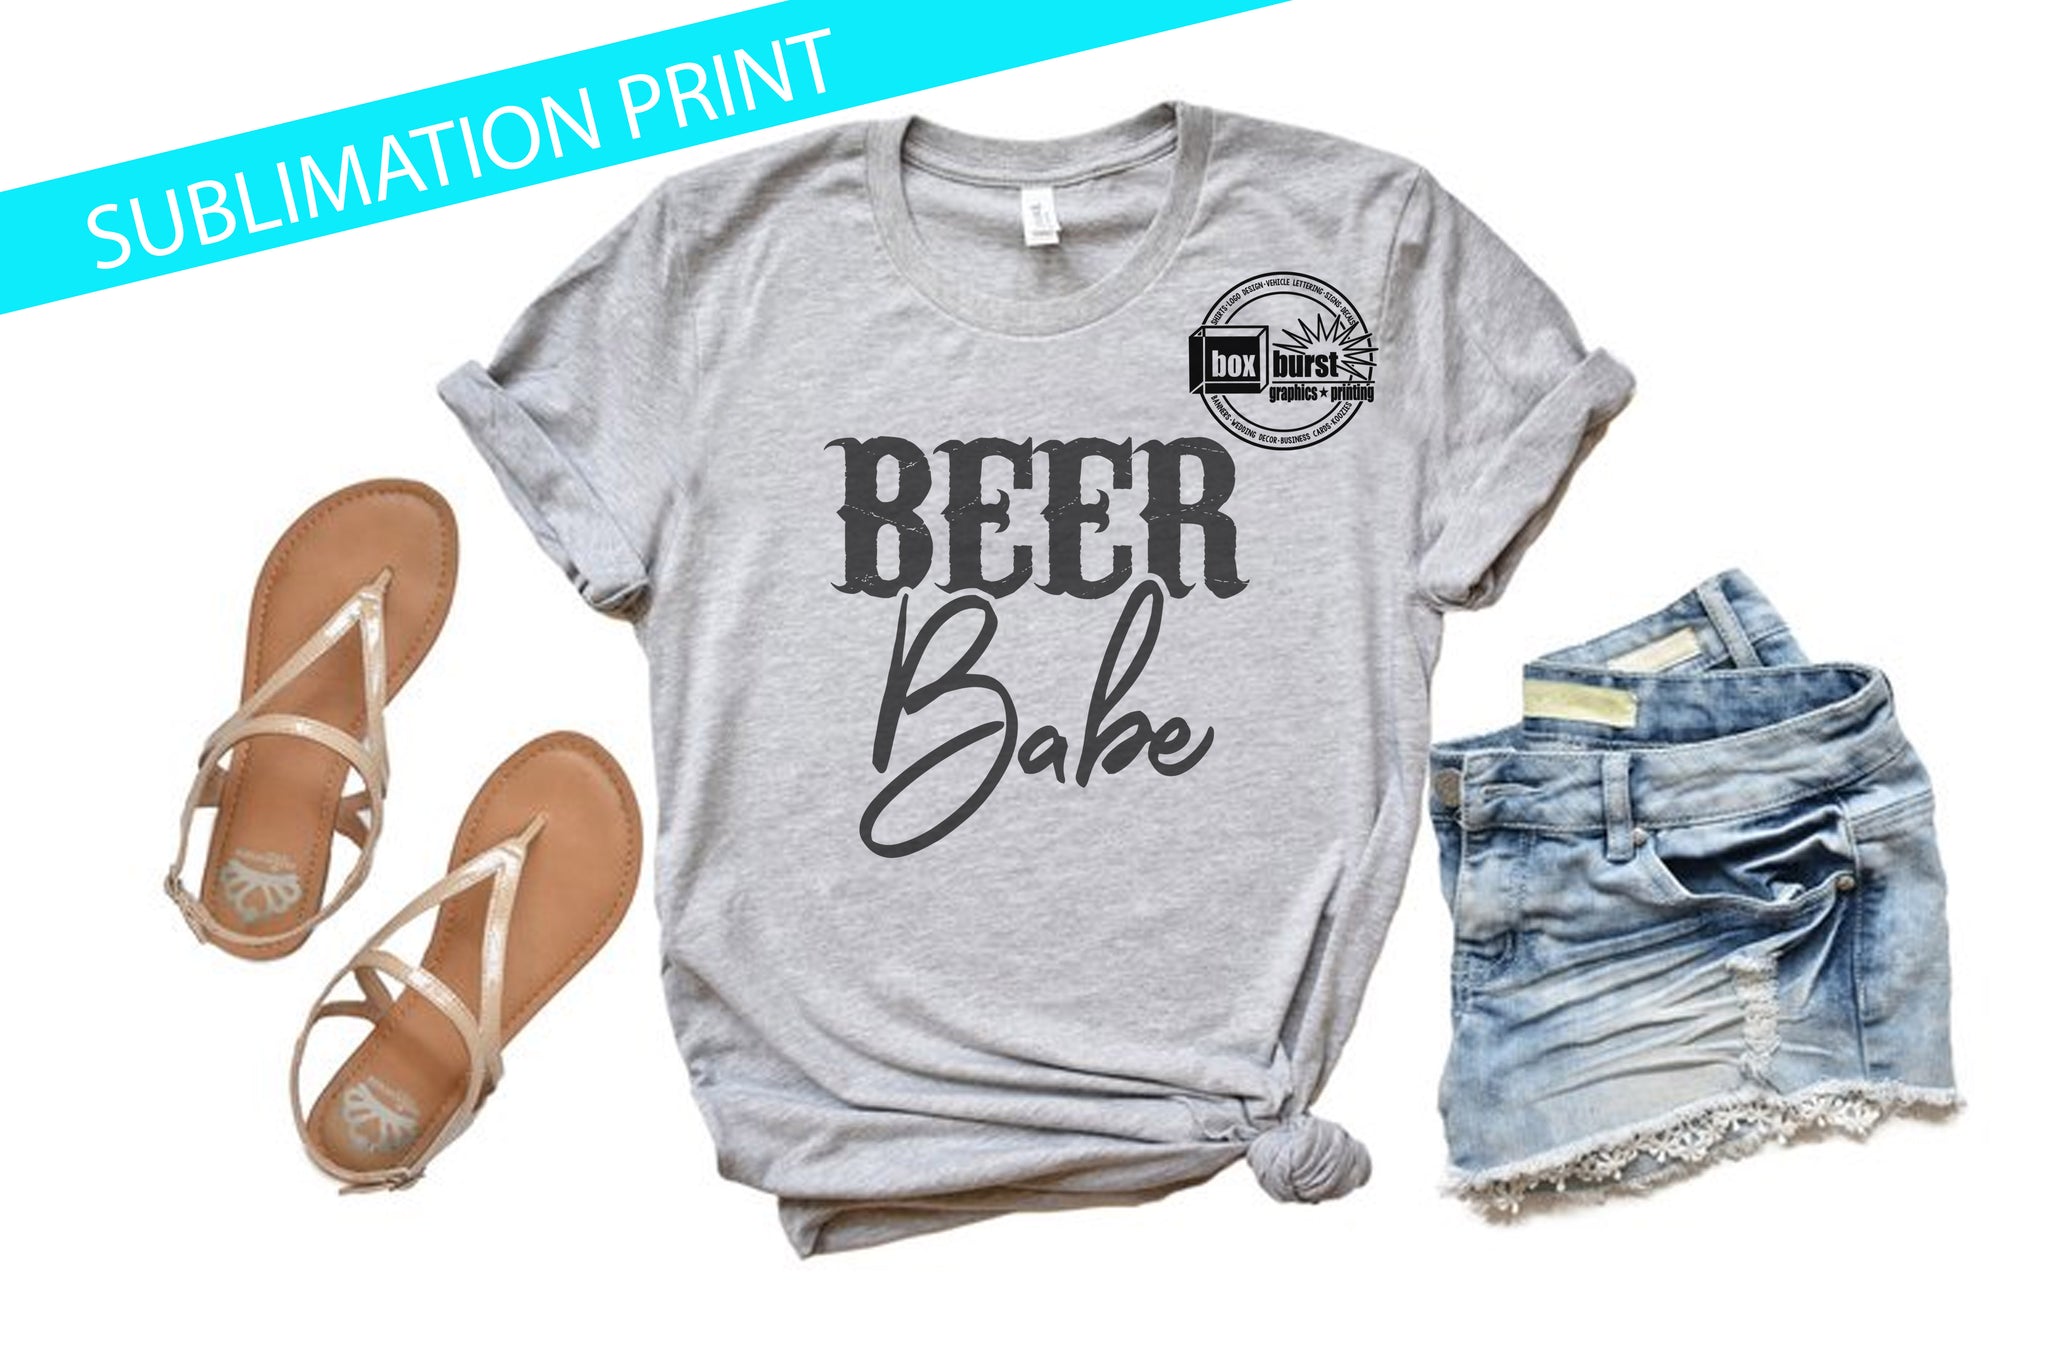 Beer babe unisex bella t shirt sublimation printing